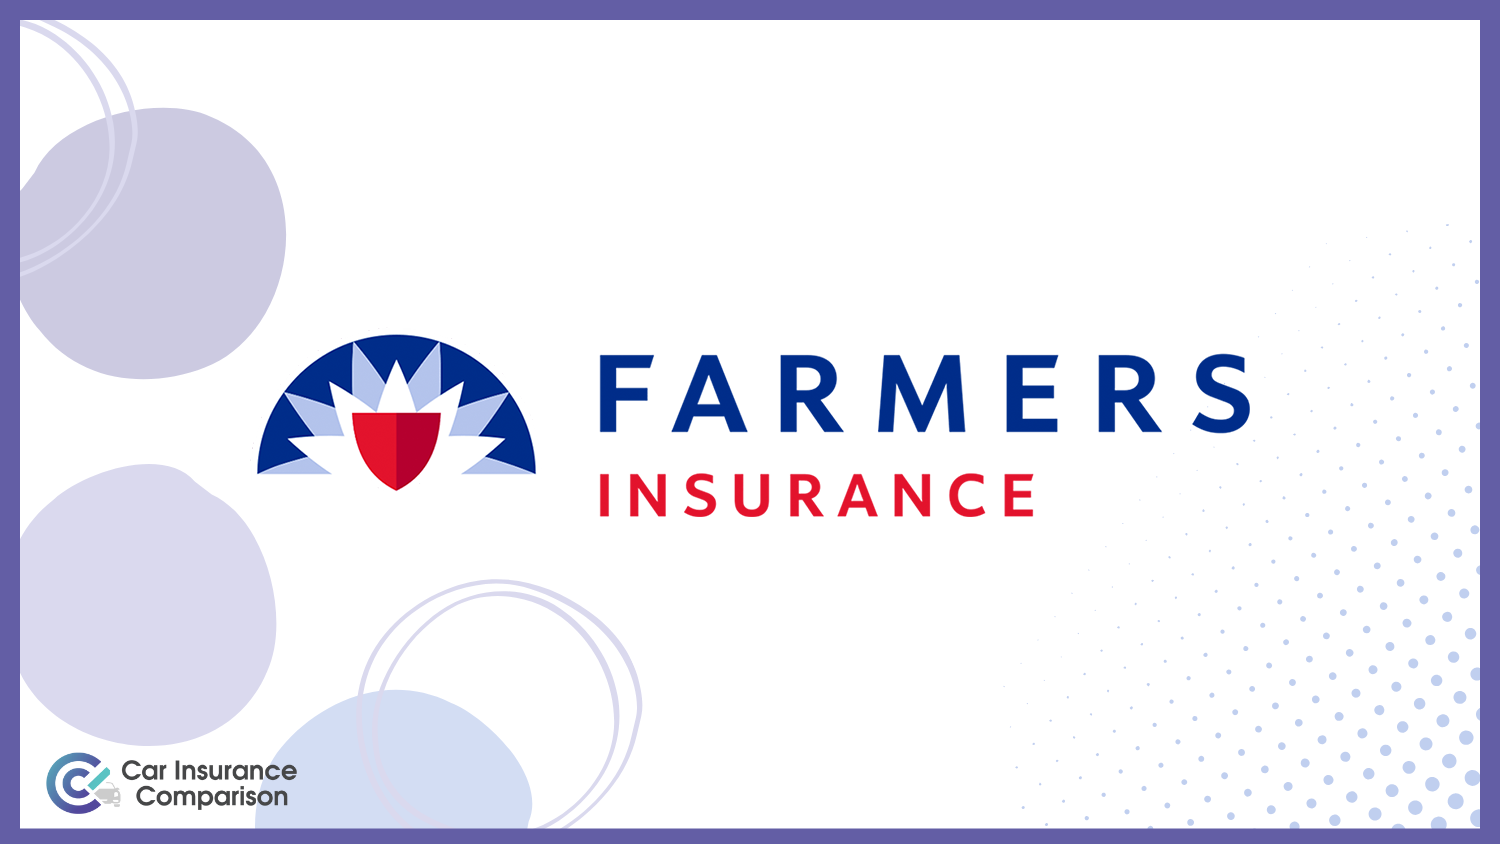 Farmers: Compare Car Insurance Rates for First-time Drivers